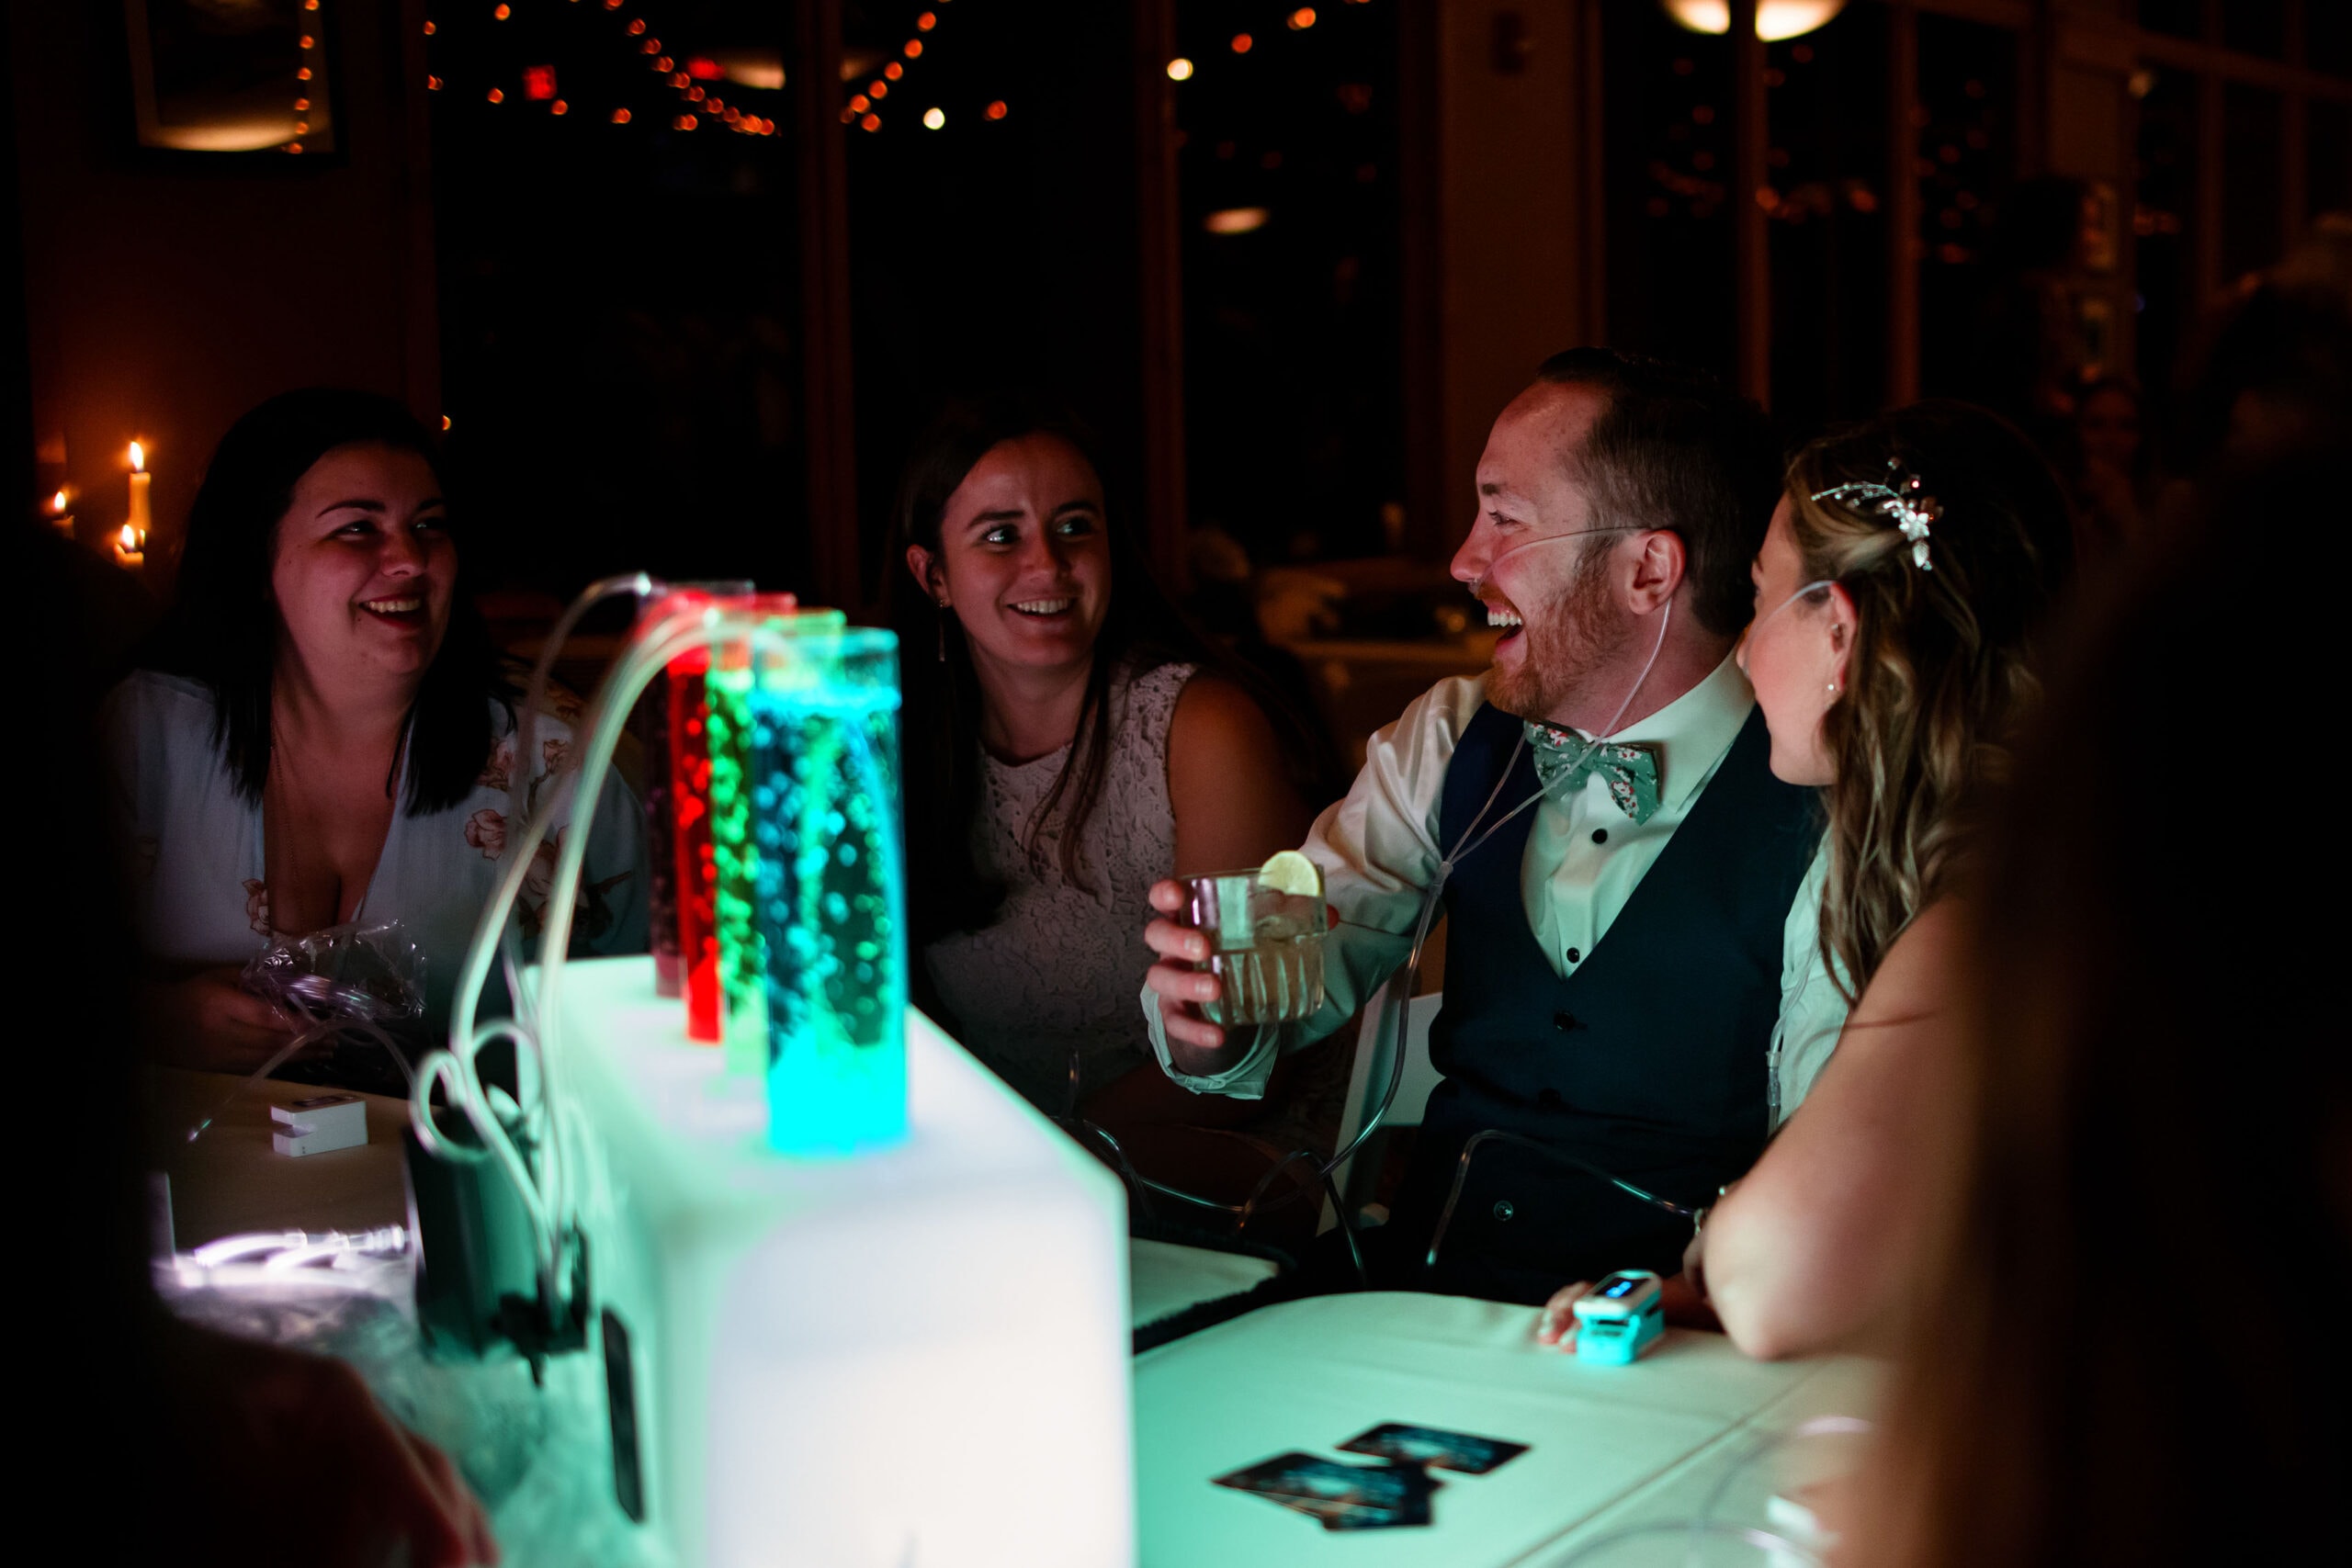 The bride and groom enjoy an oxygen bar during their reception